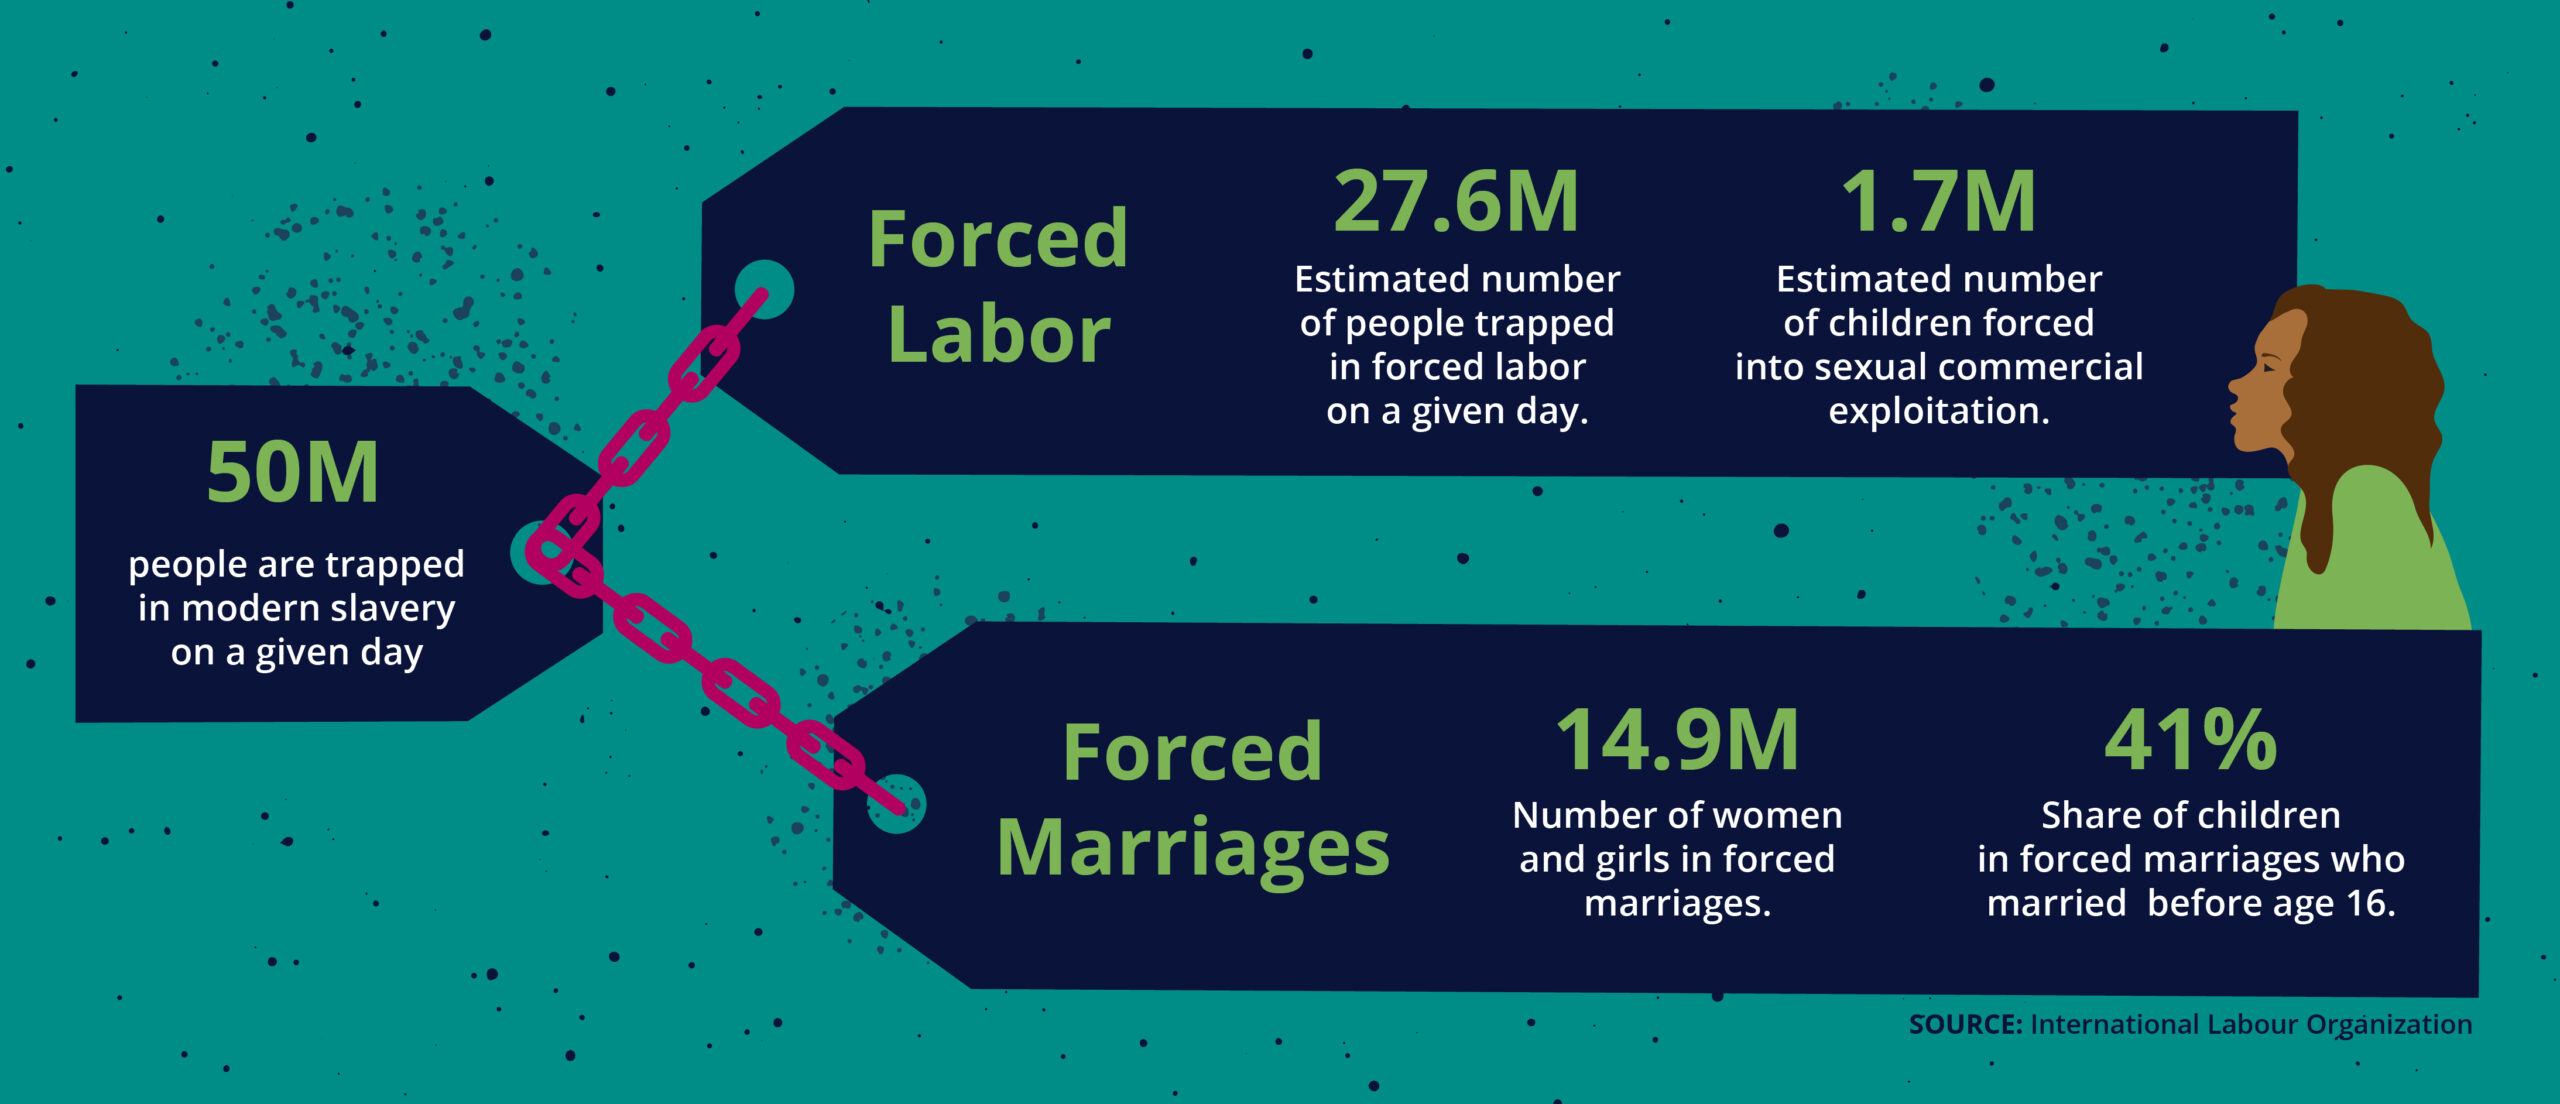 Illustration outlining human trafficking data from International Labour Organization showing Forced Labor and Forced Marriage statistics with woman on the right side of the image. Statistics: 50M people are trapped in modern slavery on a given day. This includes: Forced Labor; 27.6M - Estimated number of people trapped in forced labor on a given day; 1.7M - Estimated number of children forced into sexual commercial exploitation. Forced Marriages: 14.9M - Number of women and girls in forced marriages; 41% - Share of children in forced marriages who married before age 16.